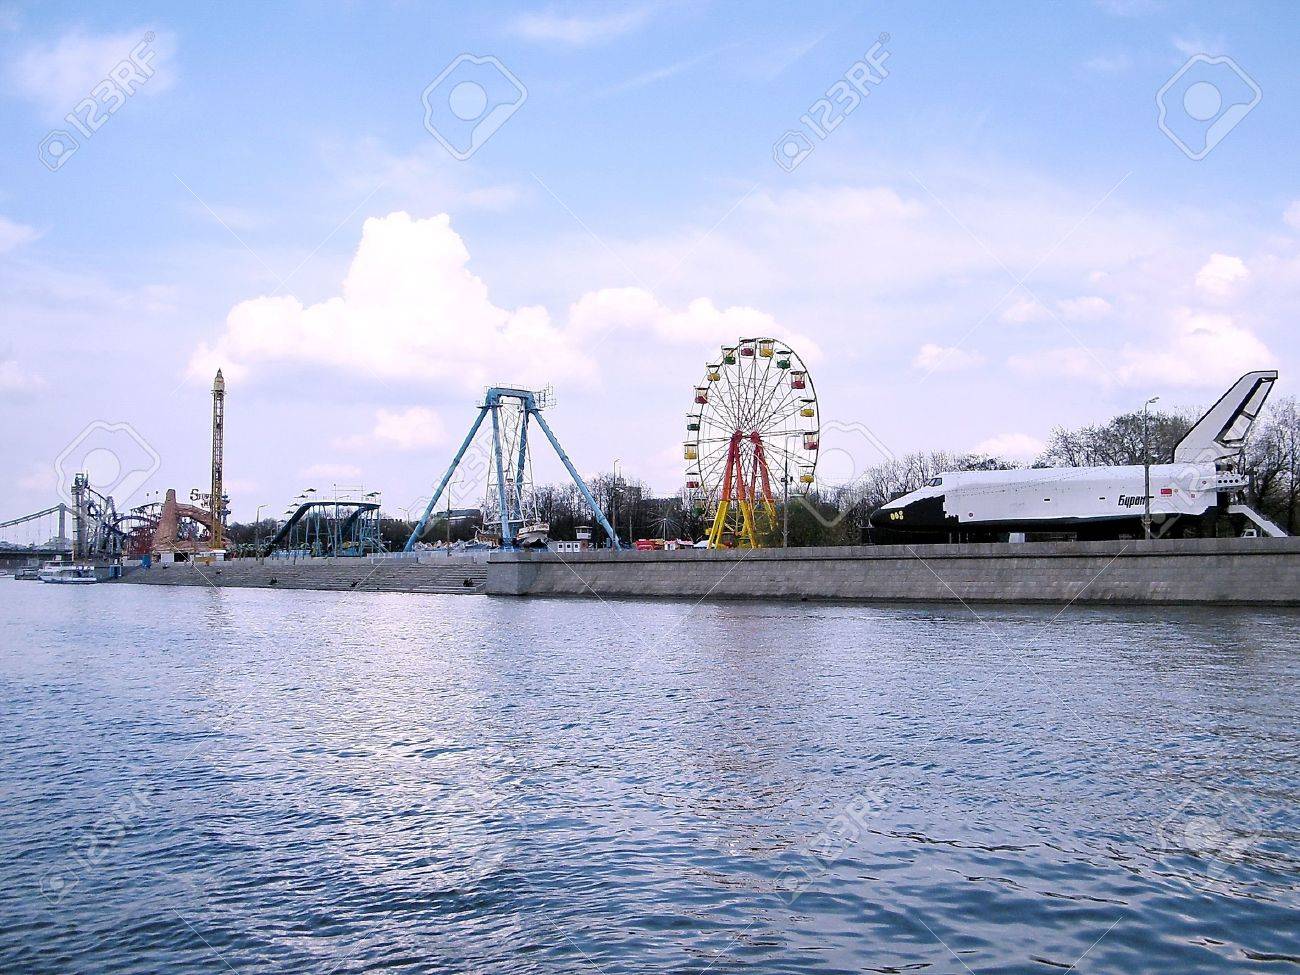 93977-view-to-space-shuttle-buran-and-attractions-at-gorky-park-on-pushkin-quay-in-moscow-russia.jpg